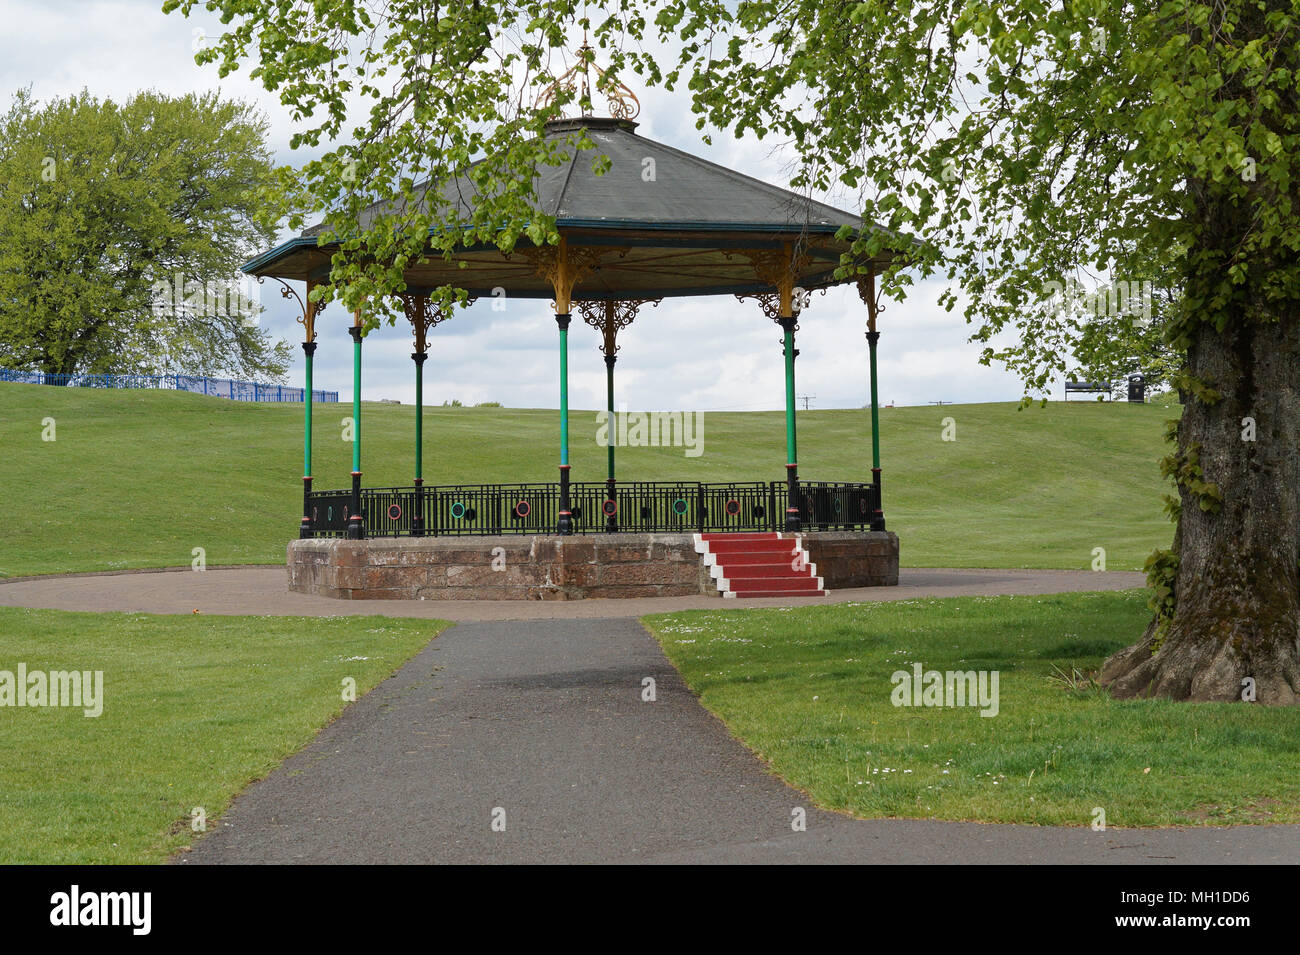 Strathaven Park Bandstand, John Hastie Park, South Lanarkshire on a Sunny Day Stock Photo